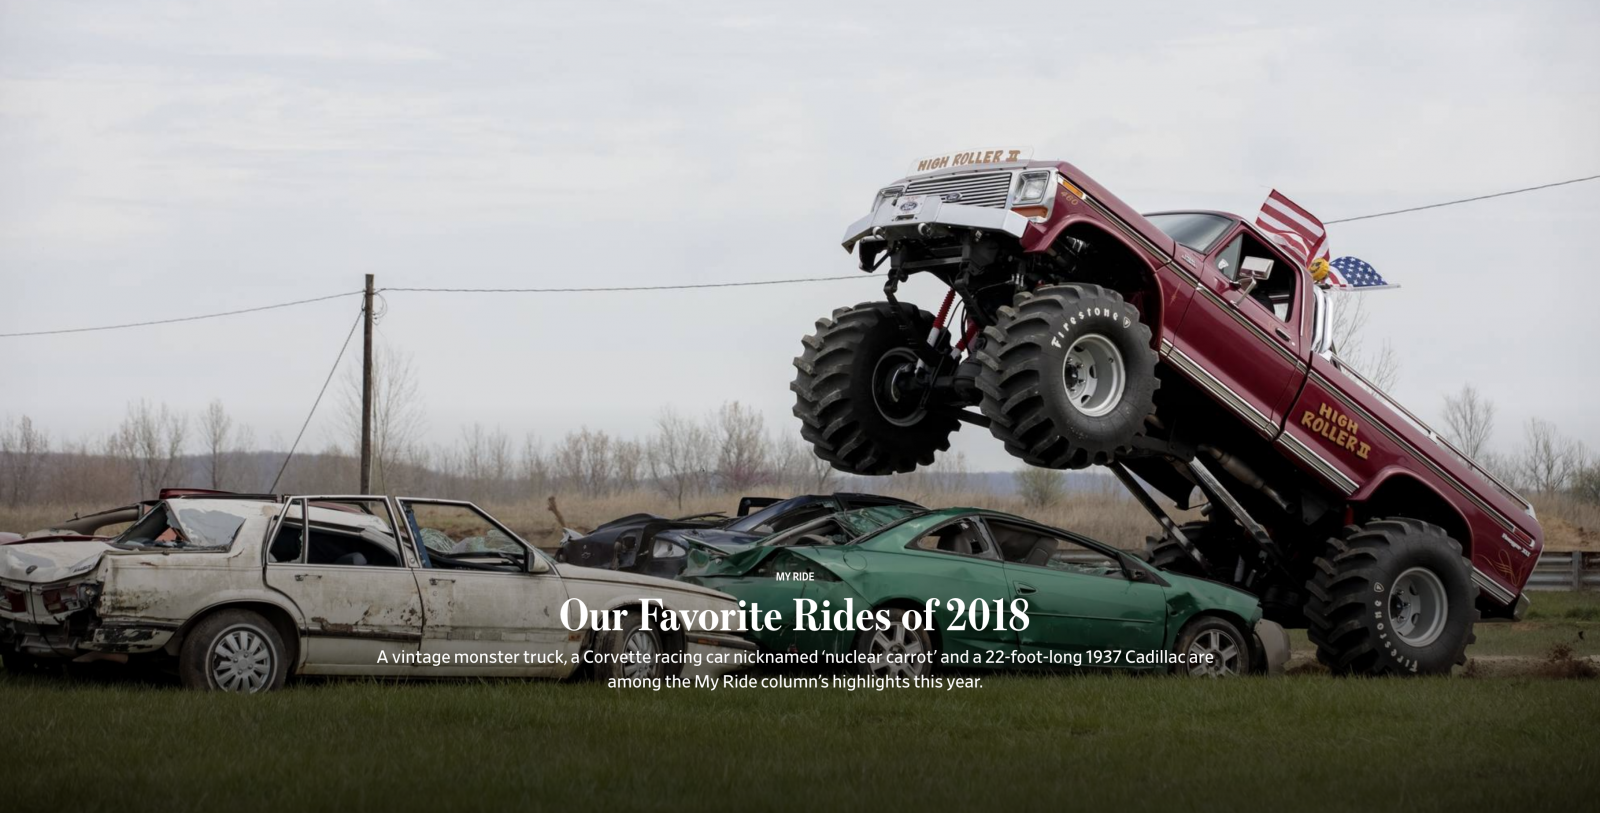 Favorite Rides of 2018: The Wall Street Journal